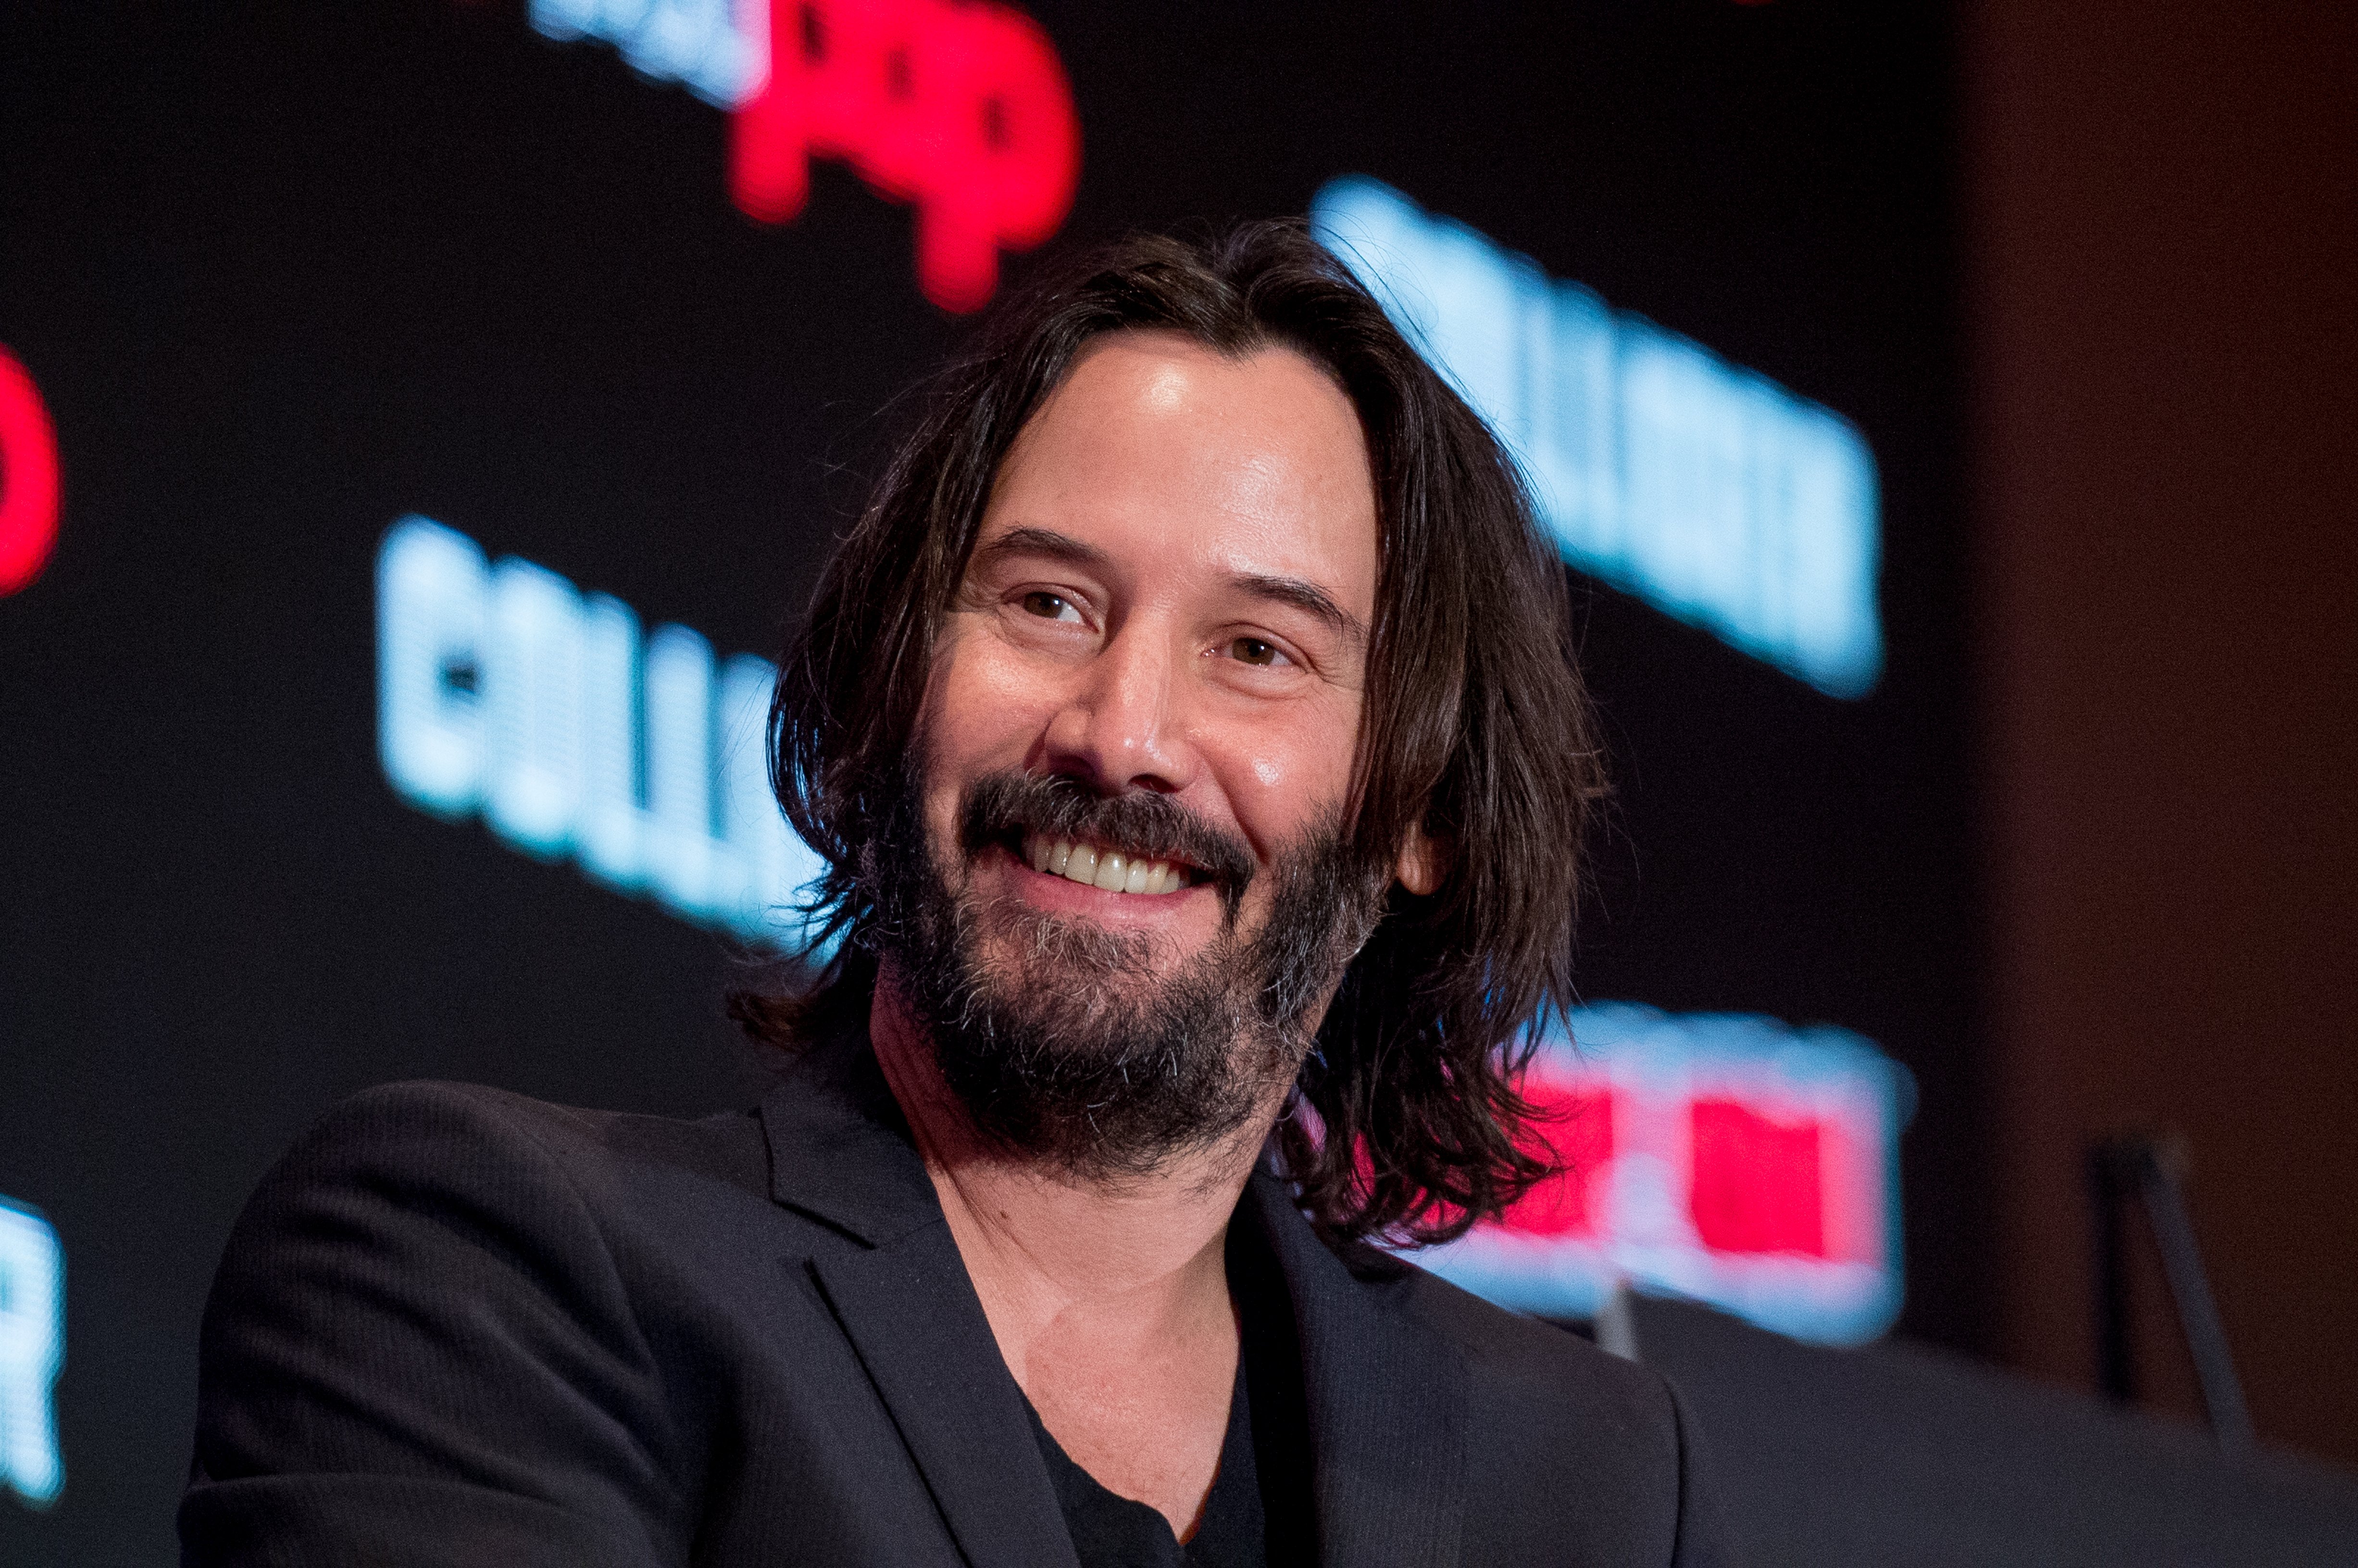 Keanu Reeves discusses "Replicas" on October 5, 2017. | Photo: Getty Images.